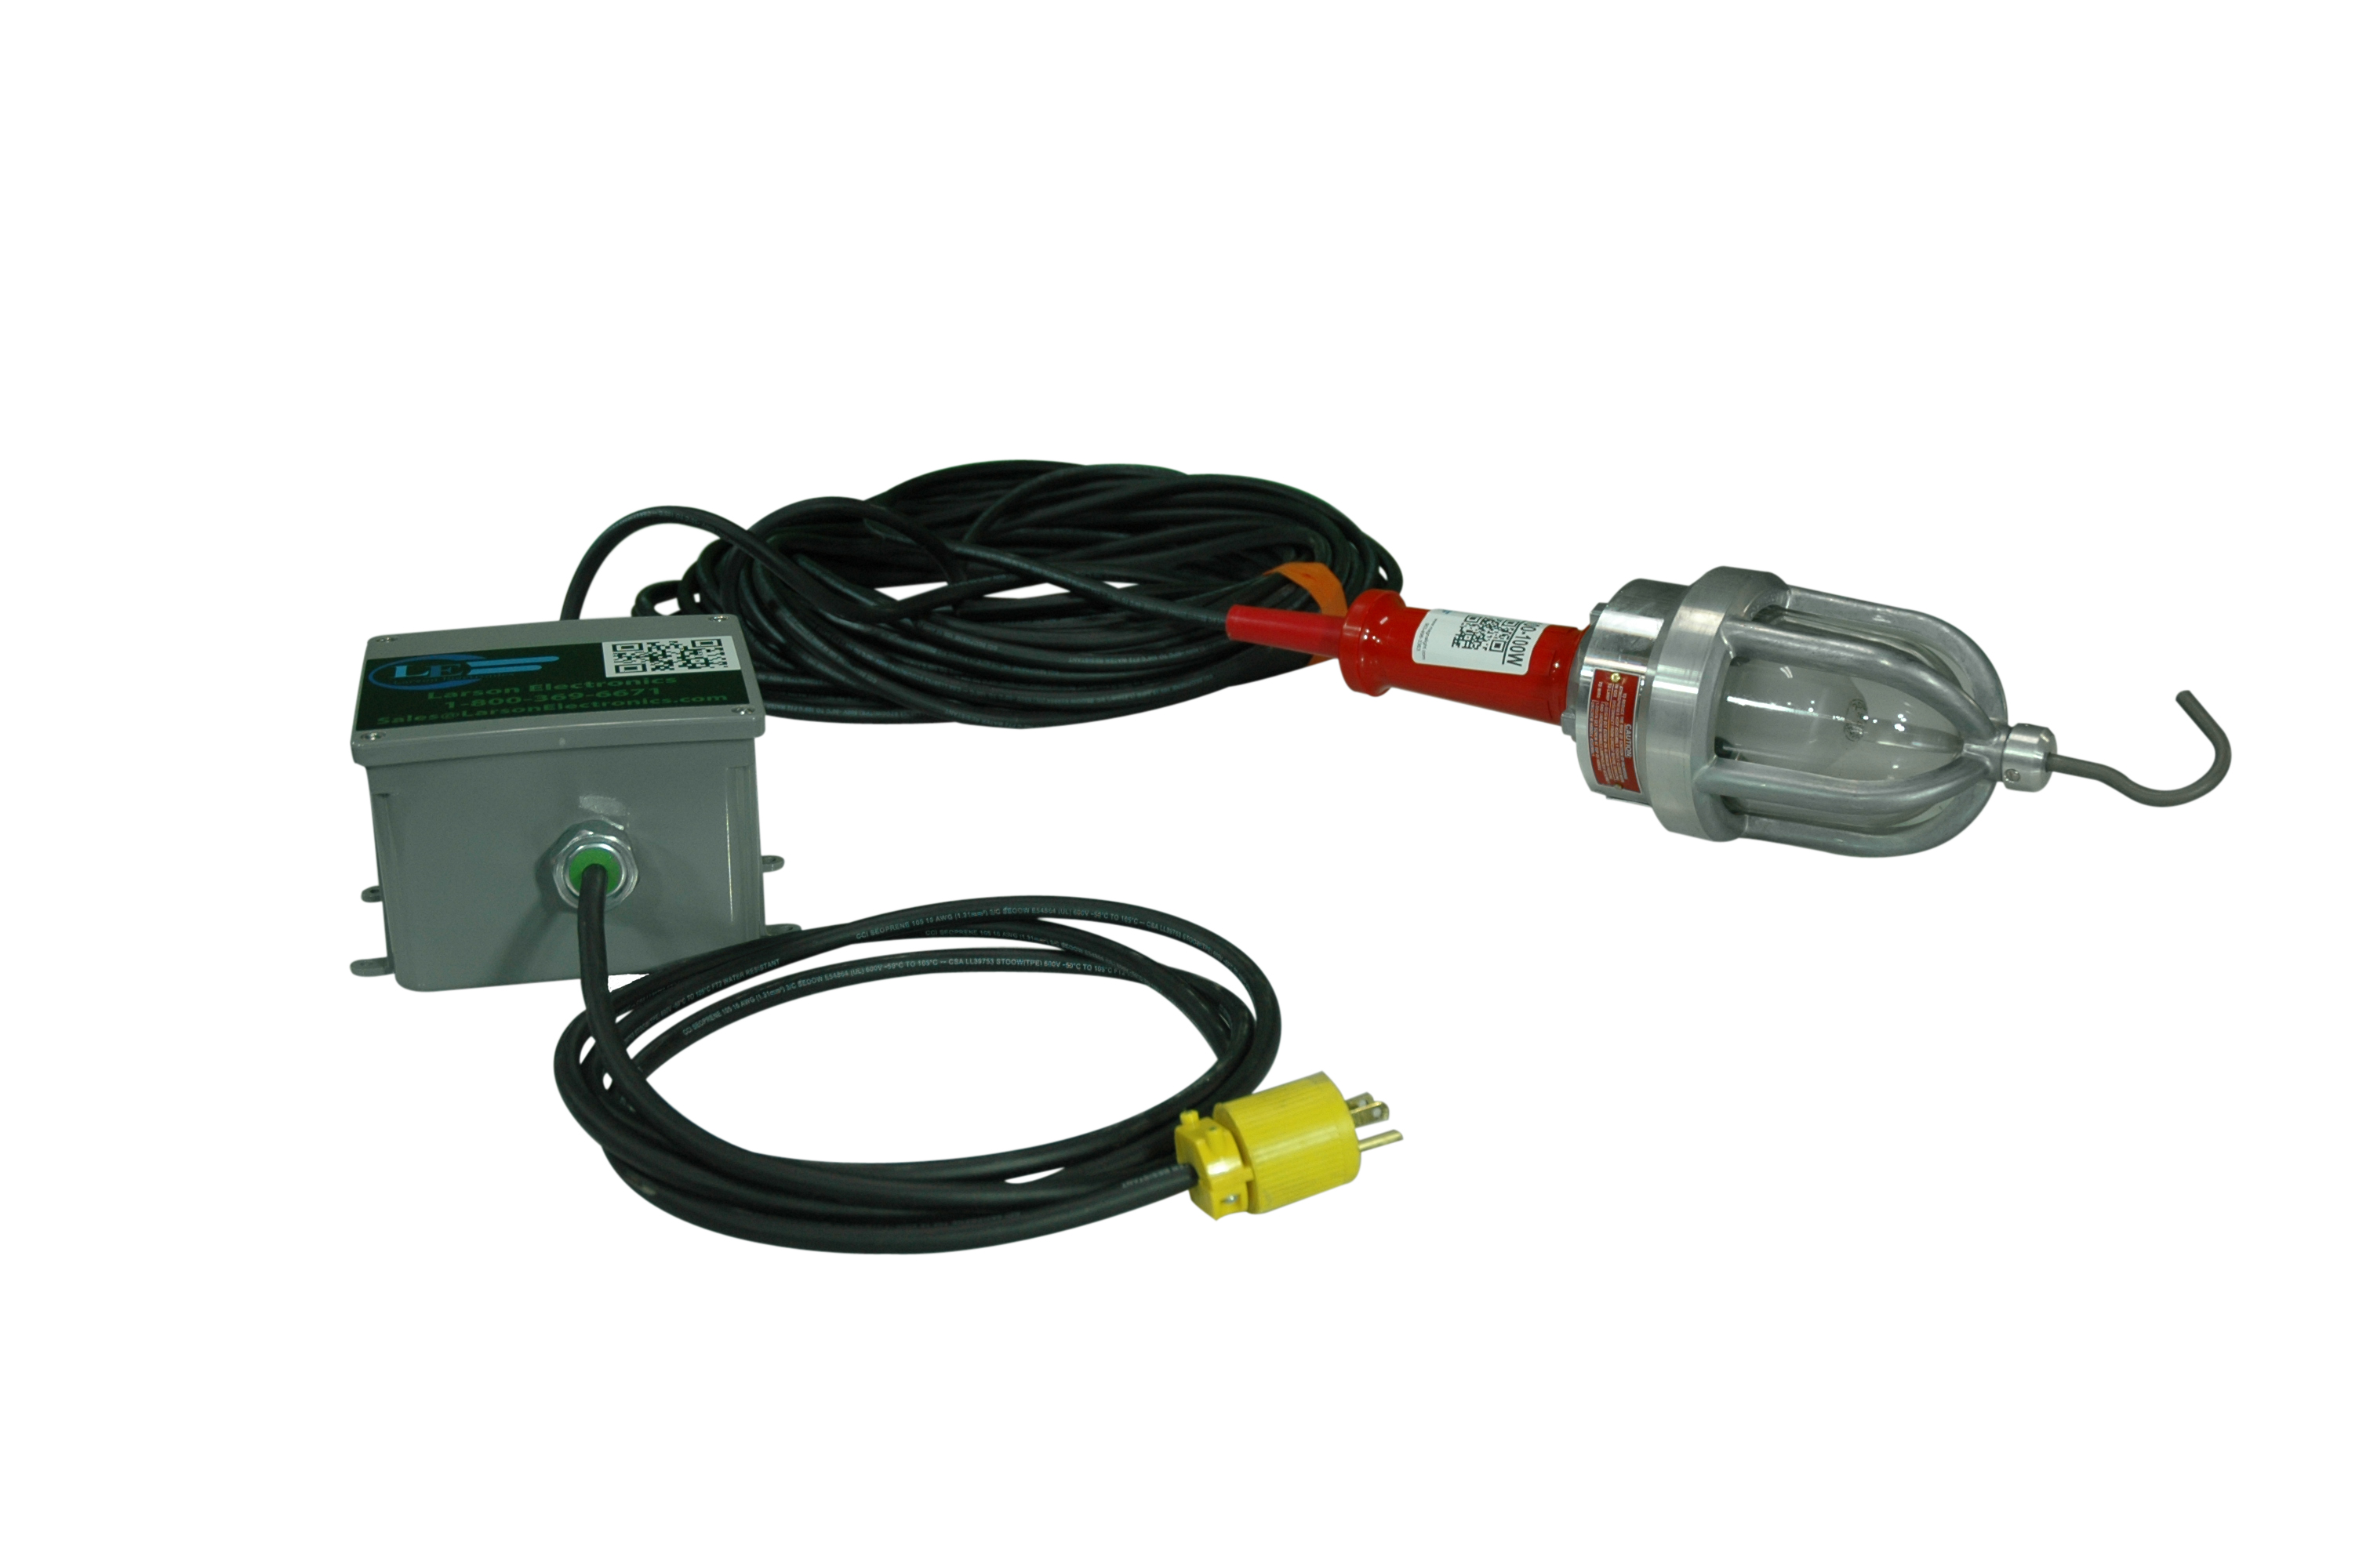 Class 1 Division 1 Explosion Proof Drop Light with Inline Transformer